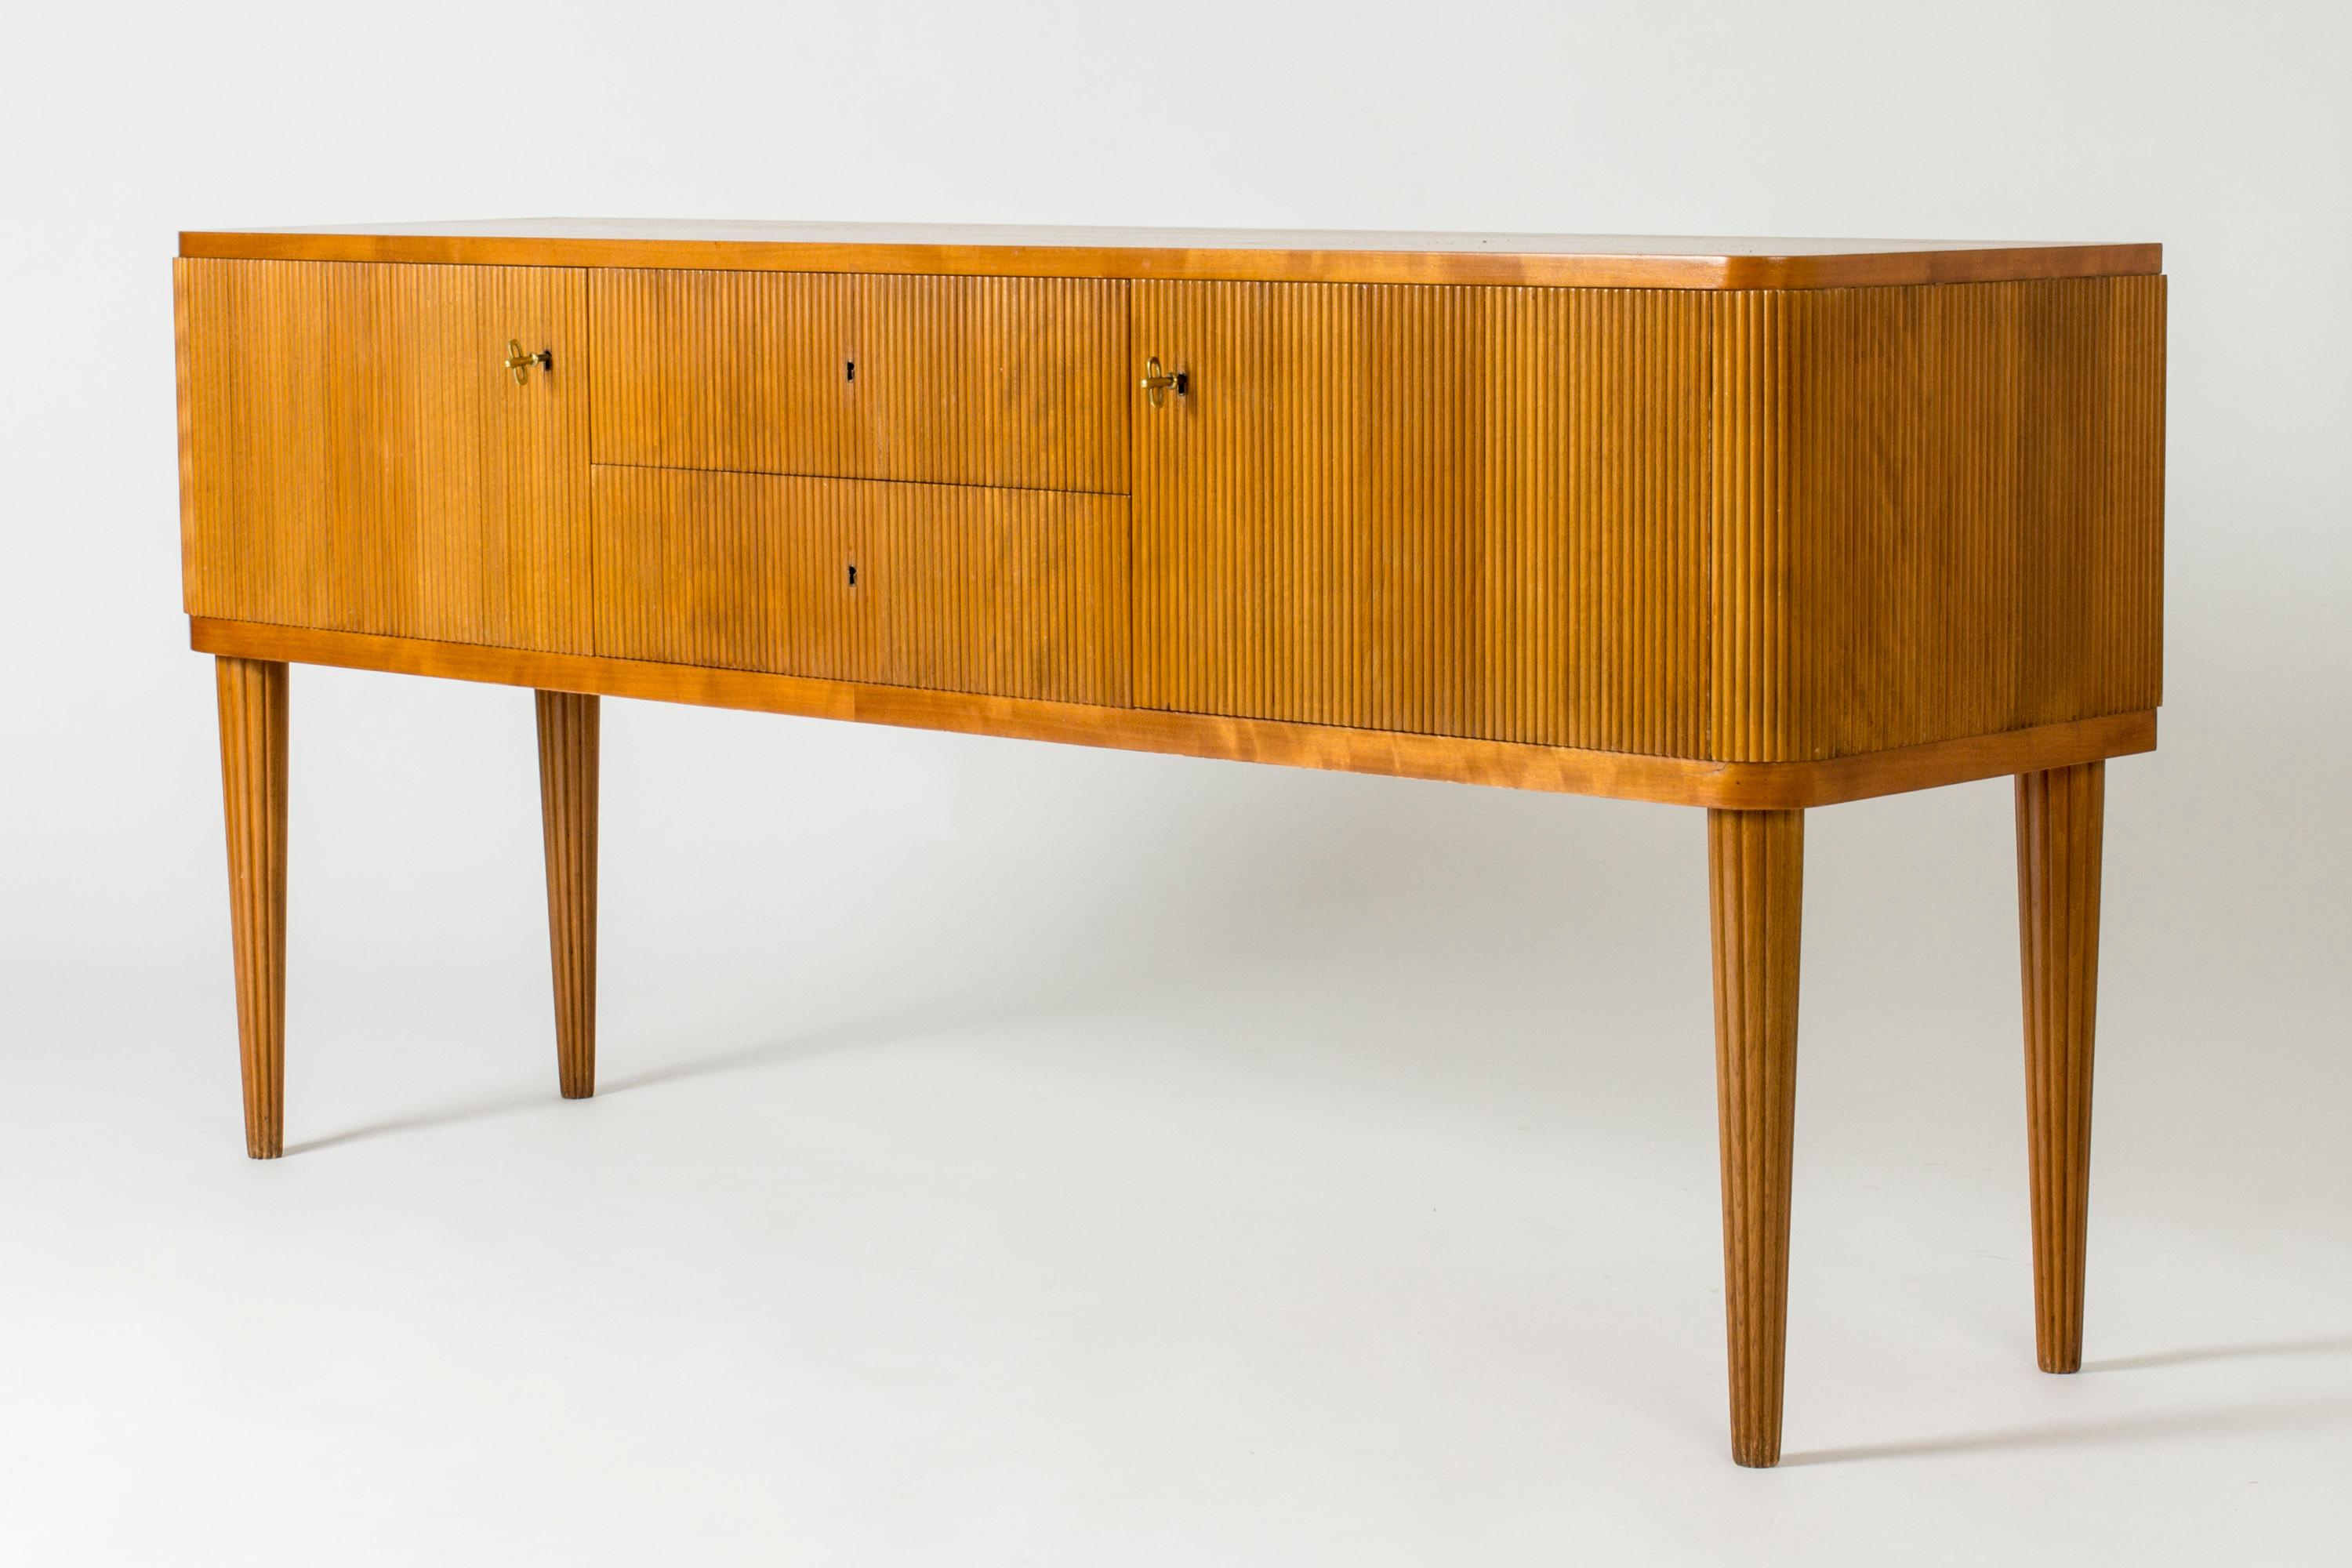 Beautiful Swedish modern sideboard in master carpenter quality, made in the 1940s. Elegant, neat design with an embossed striped pattern on the front and sides. Tapering, striped legs.